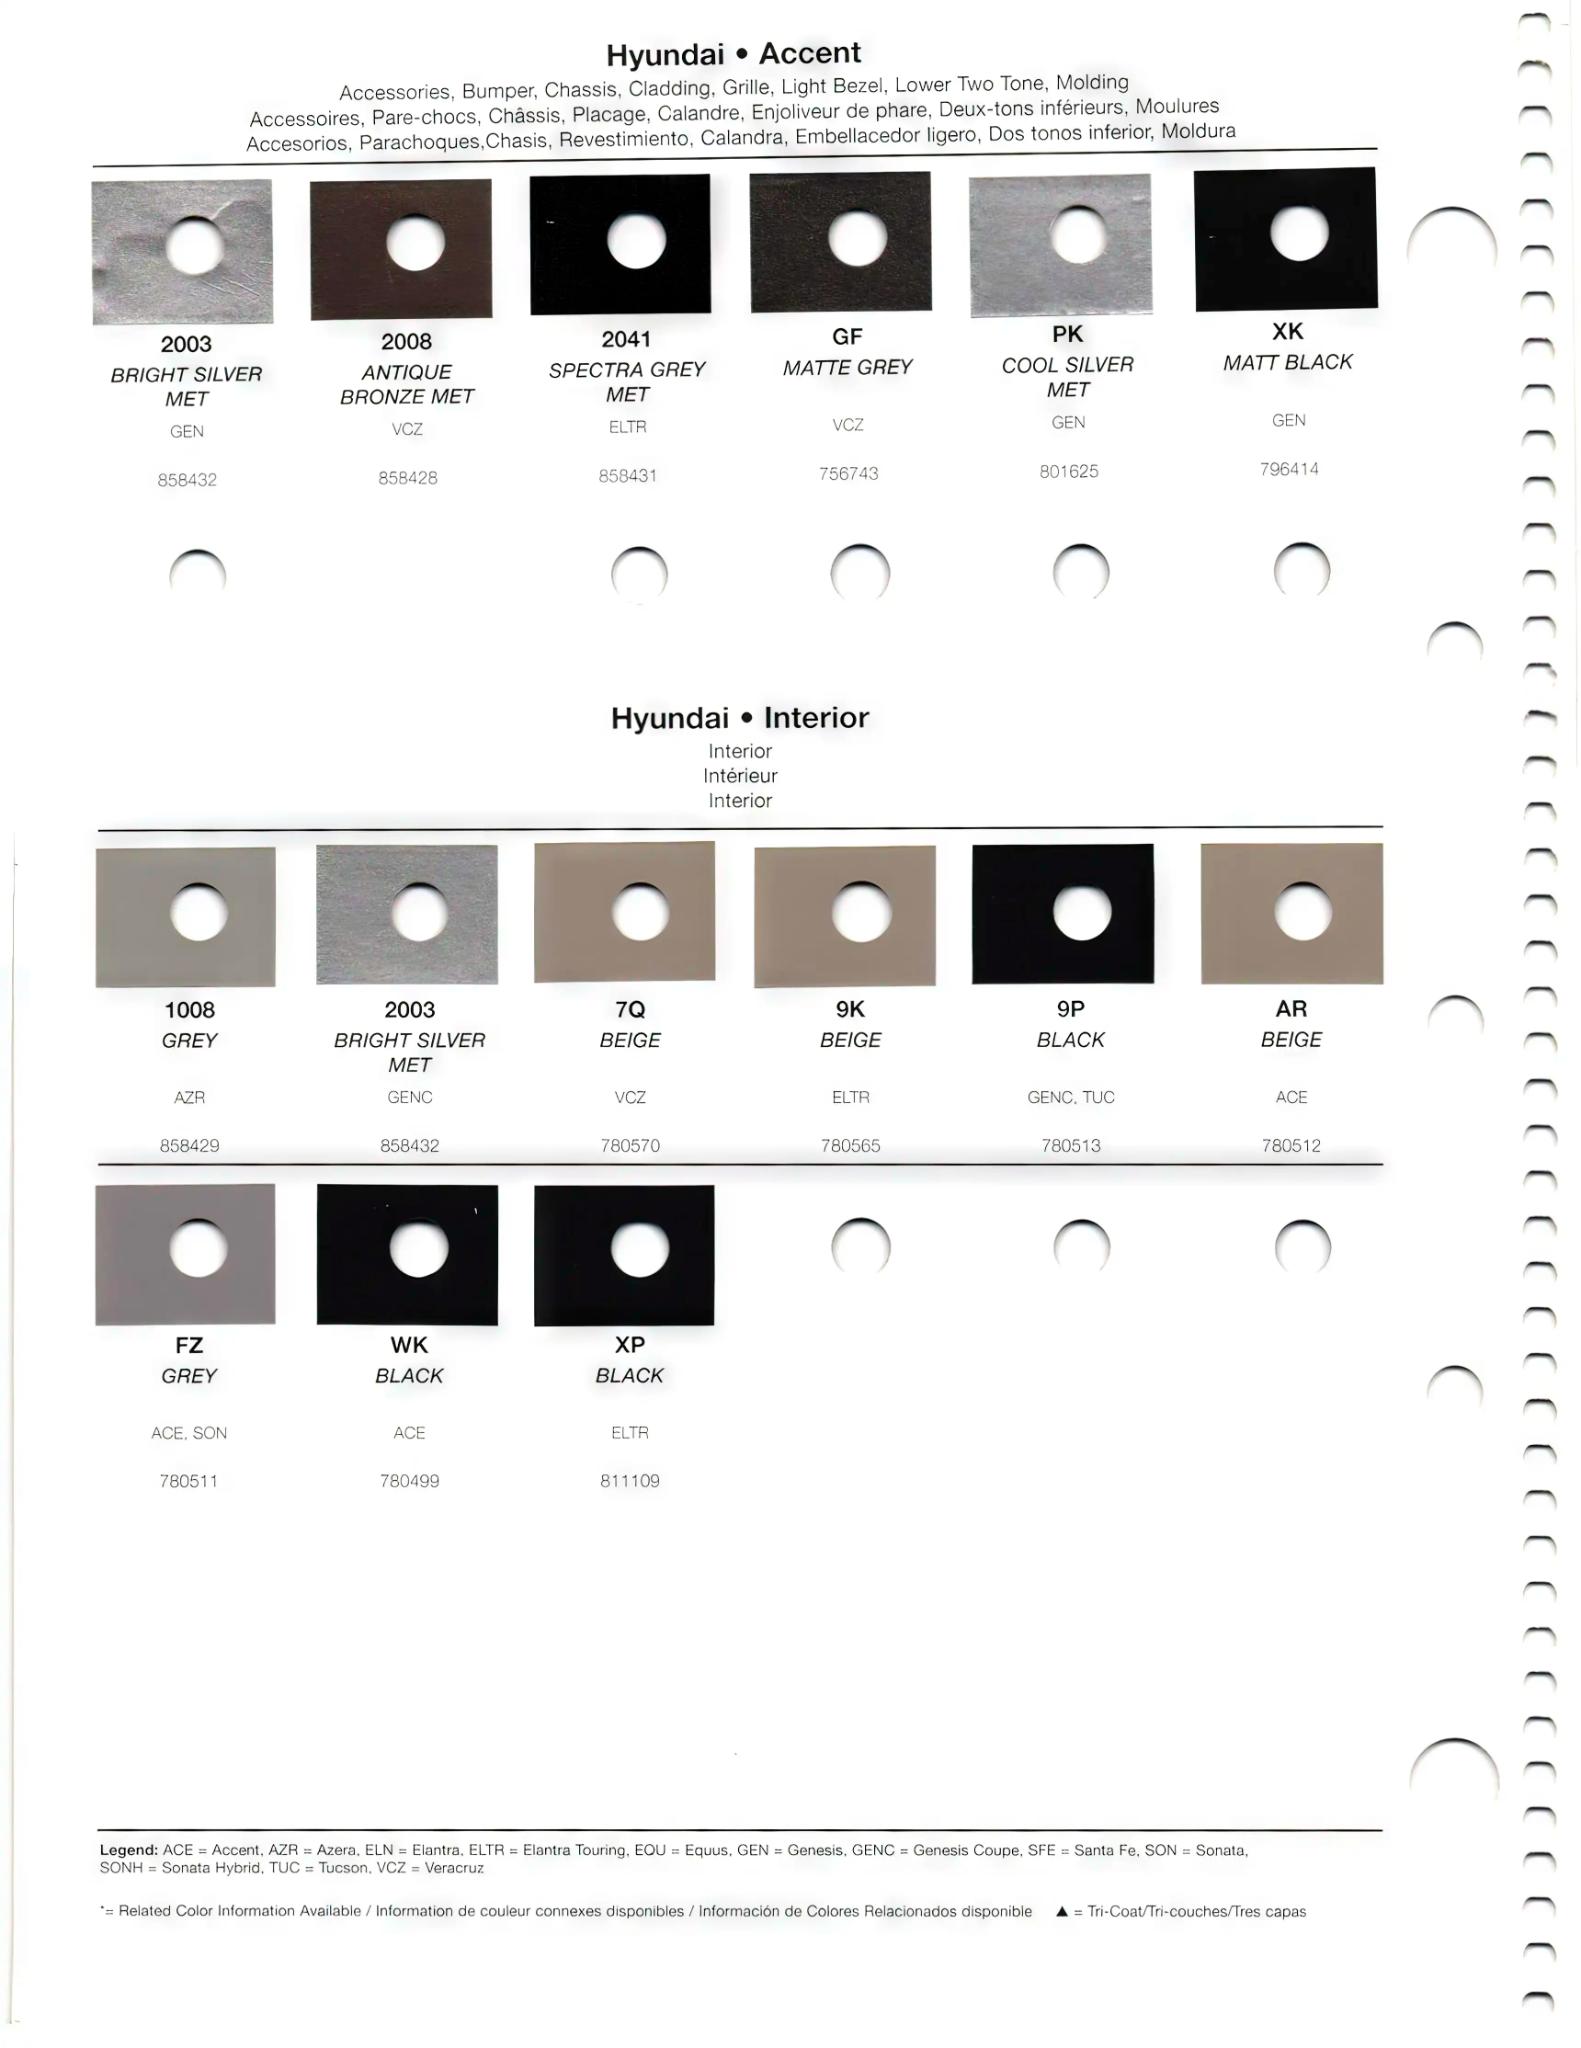 car color swatches of the paint code they represent